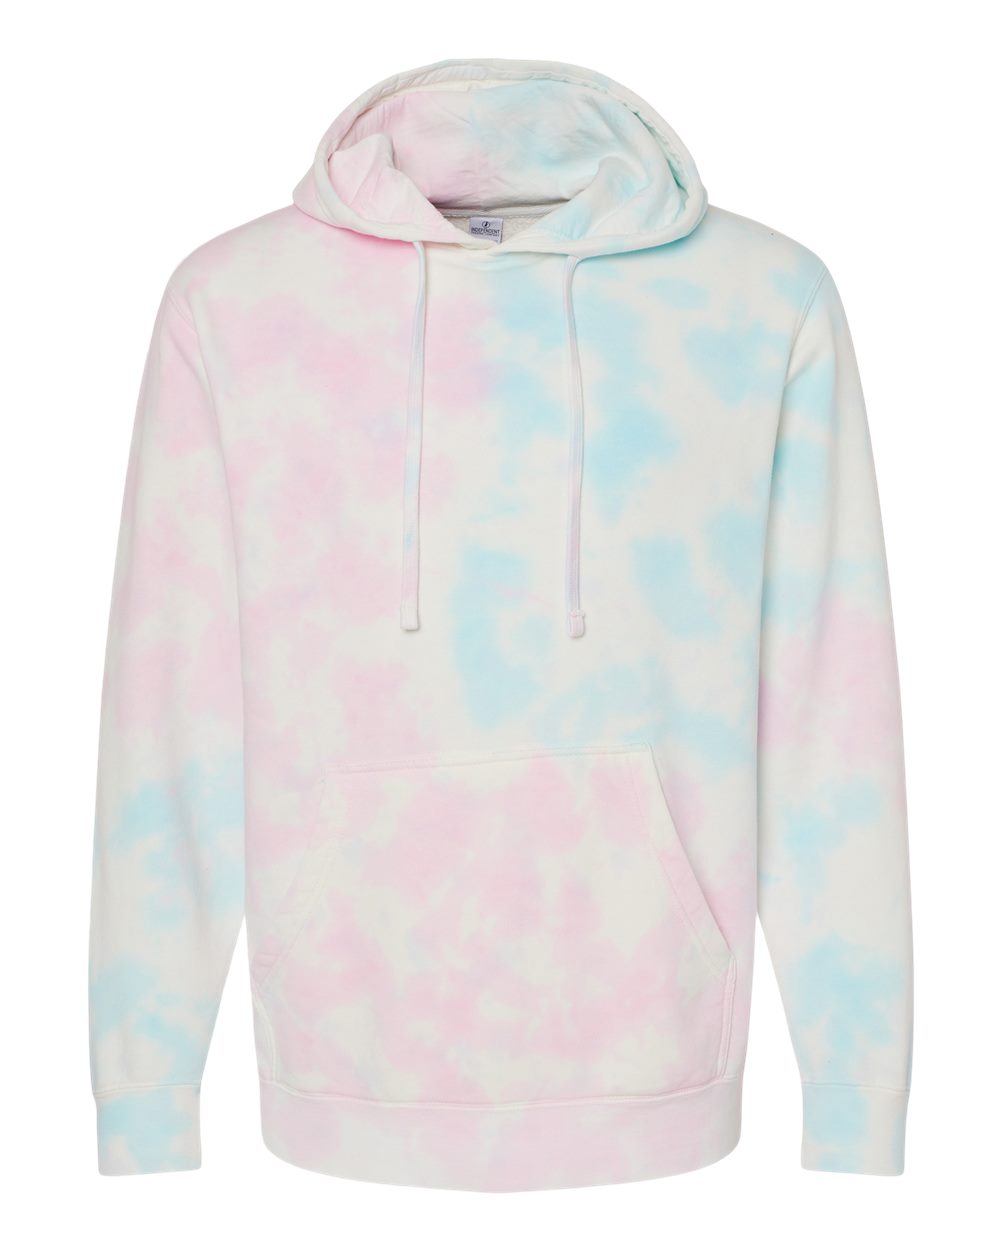 Midweight Tie-Dyed Hooded Men's Sweatshirt - Independent Trading Co. PRM4500TD